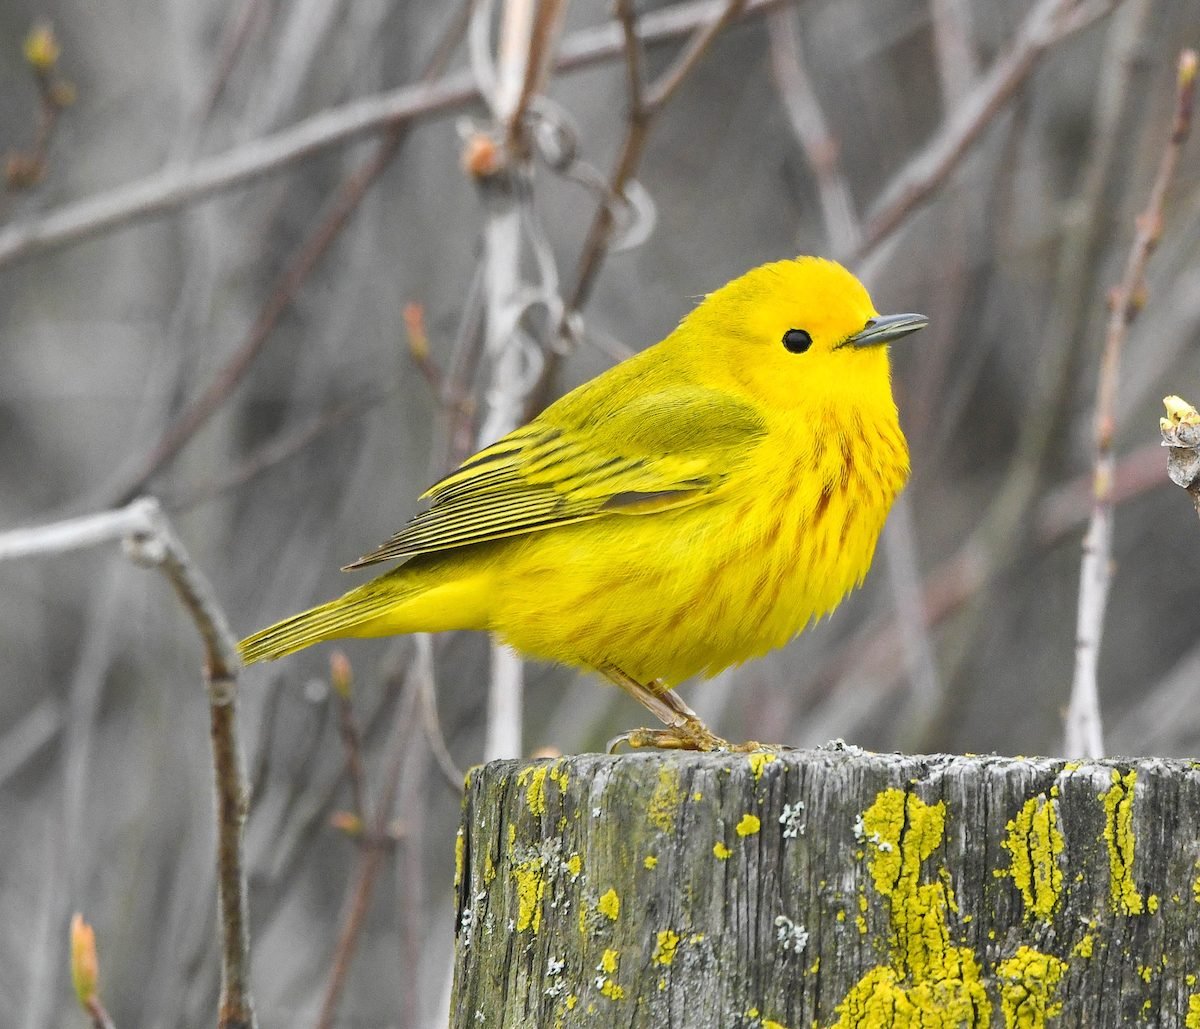 How to Identify a Yellow Warbler